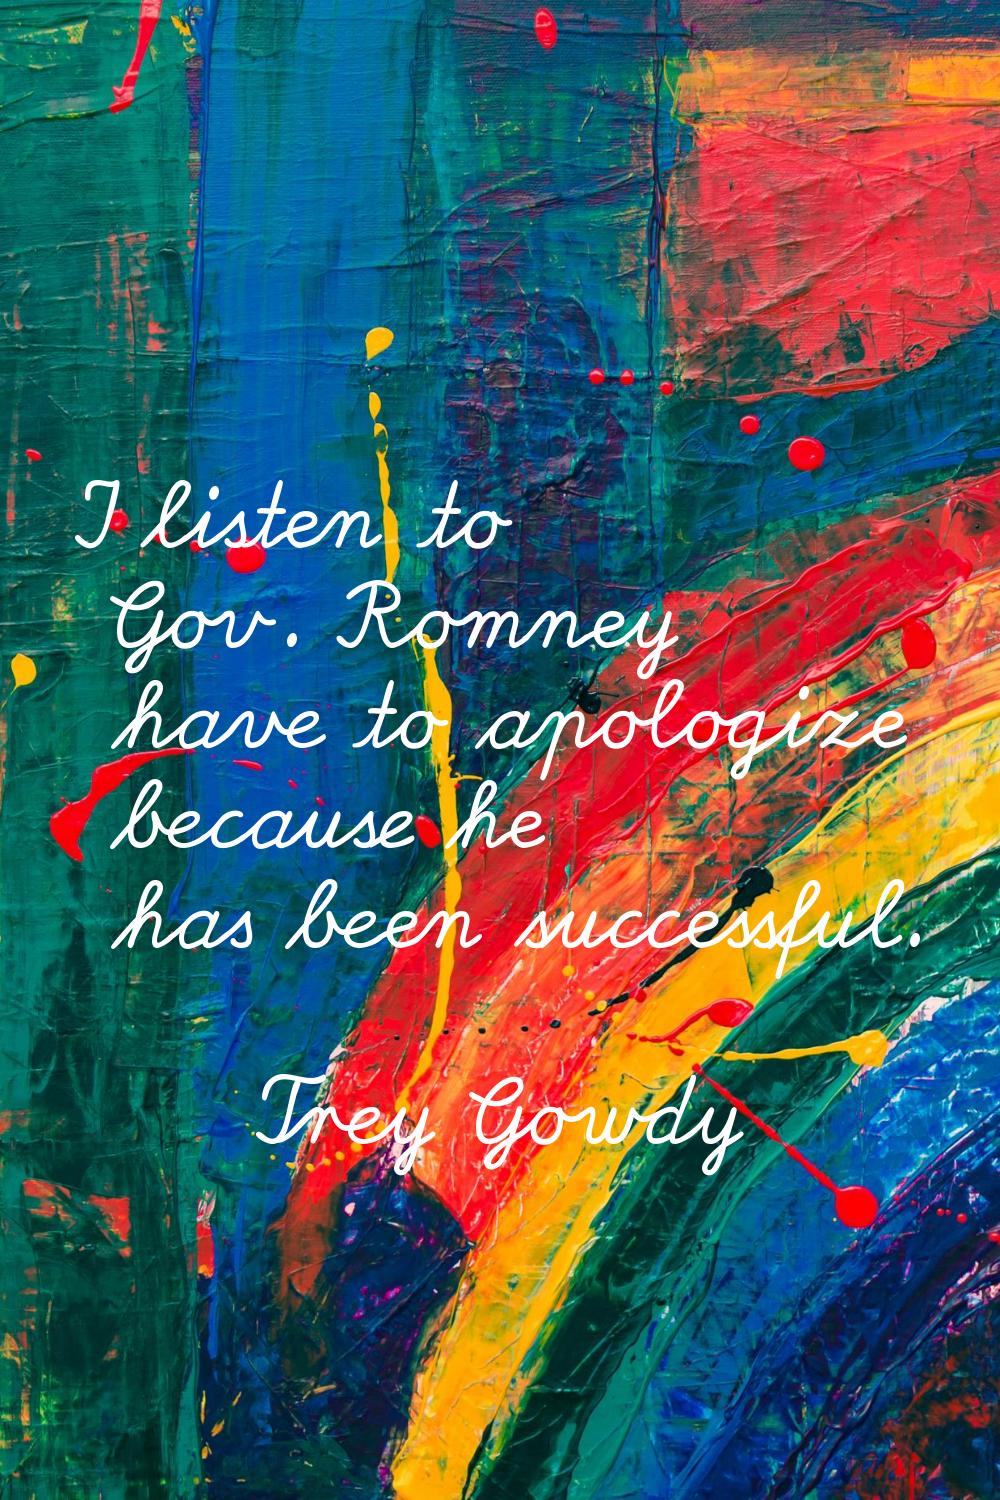 I listen to Gov. Romney have to apologize because he has been successful.